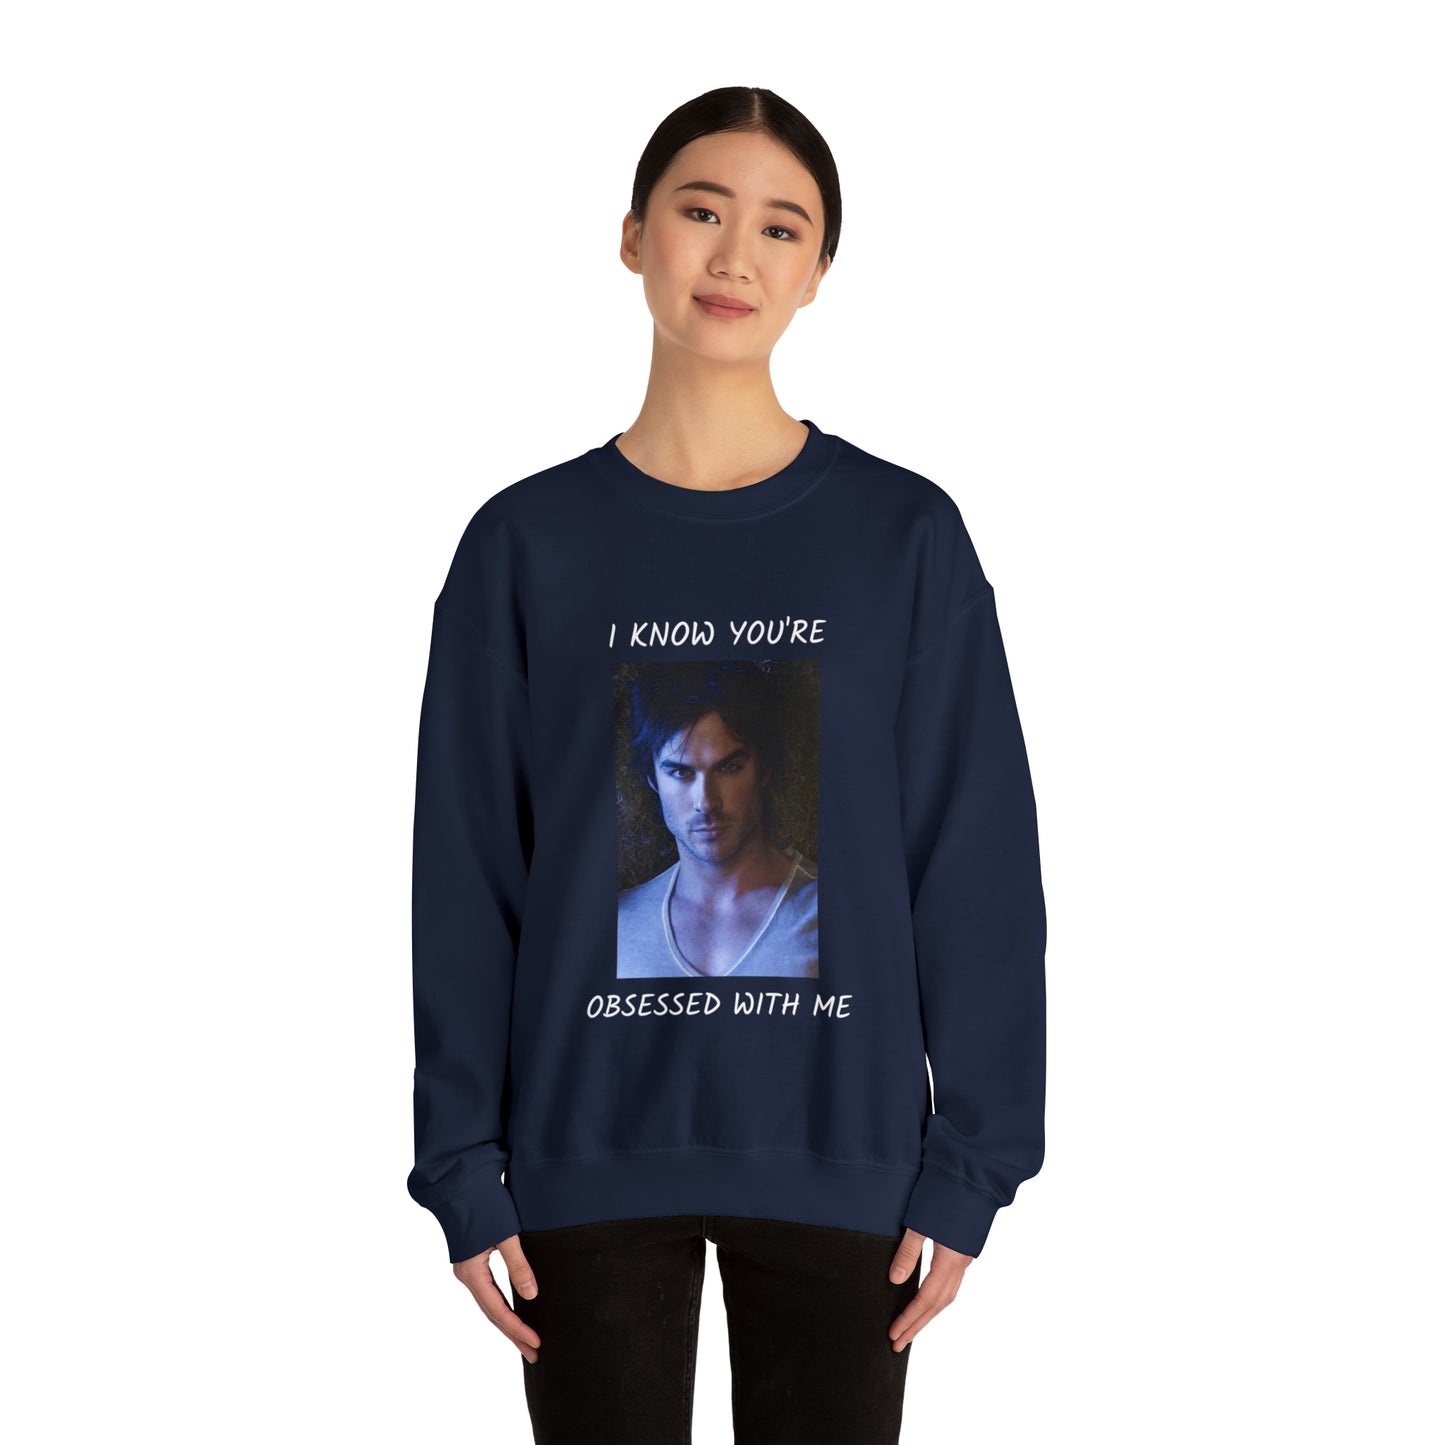 Damon Salvatore Crewneck Sweatshirt I know you're obsessed with me Vampire Diaries